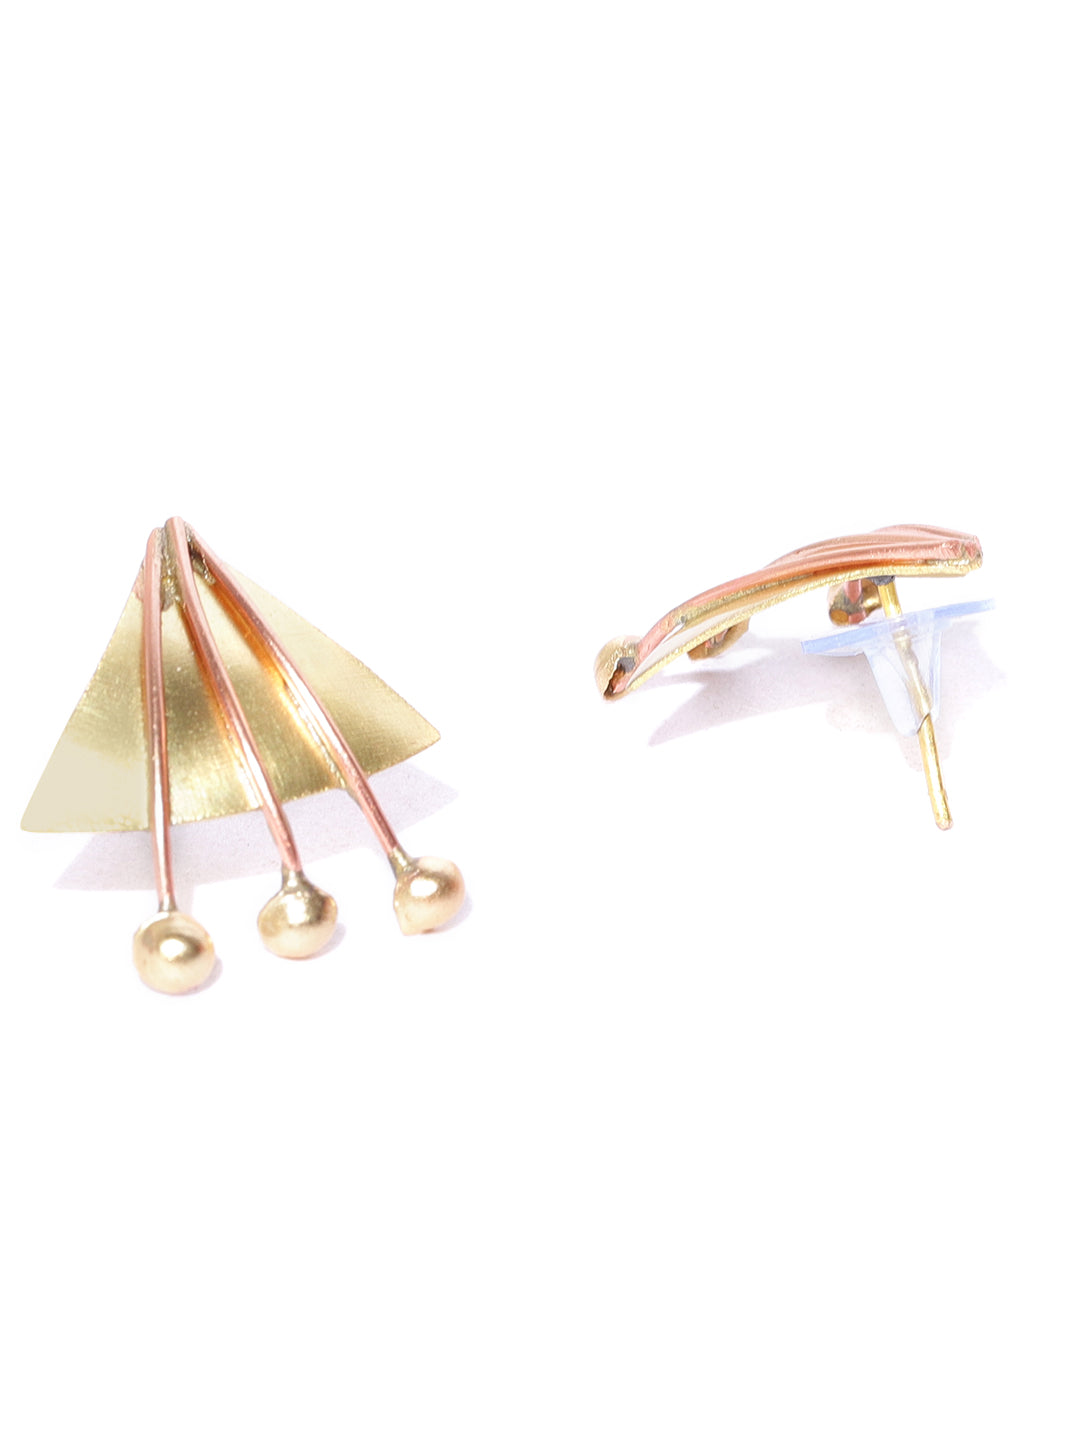 Gold And Copper Geometric Shaped Stud Earring With Push Back For Women And Girls